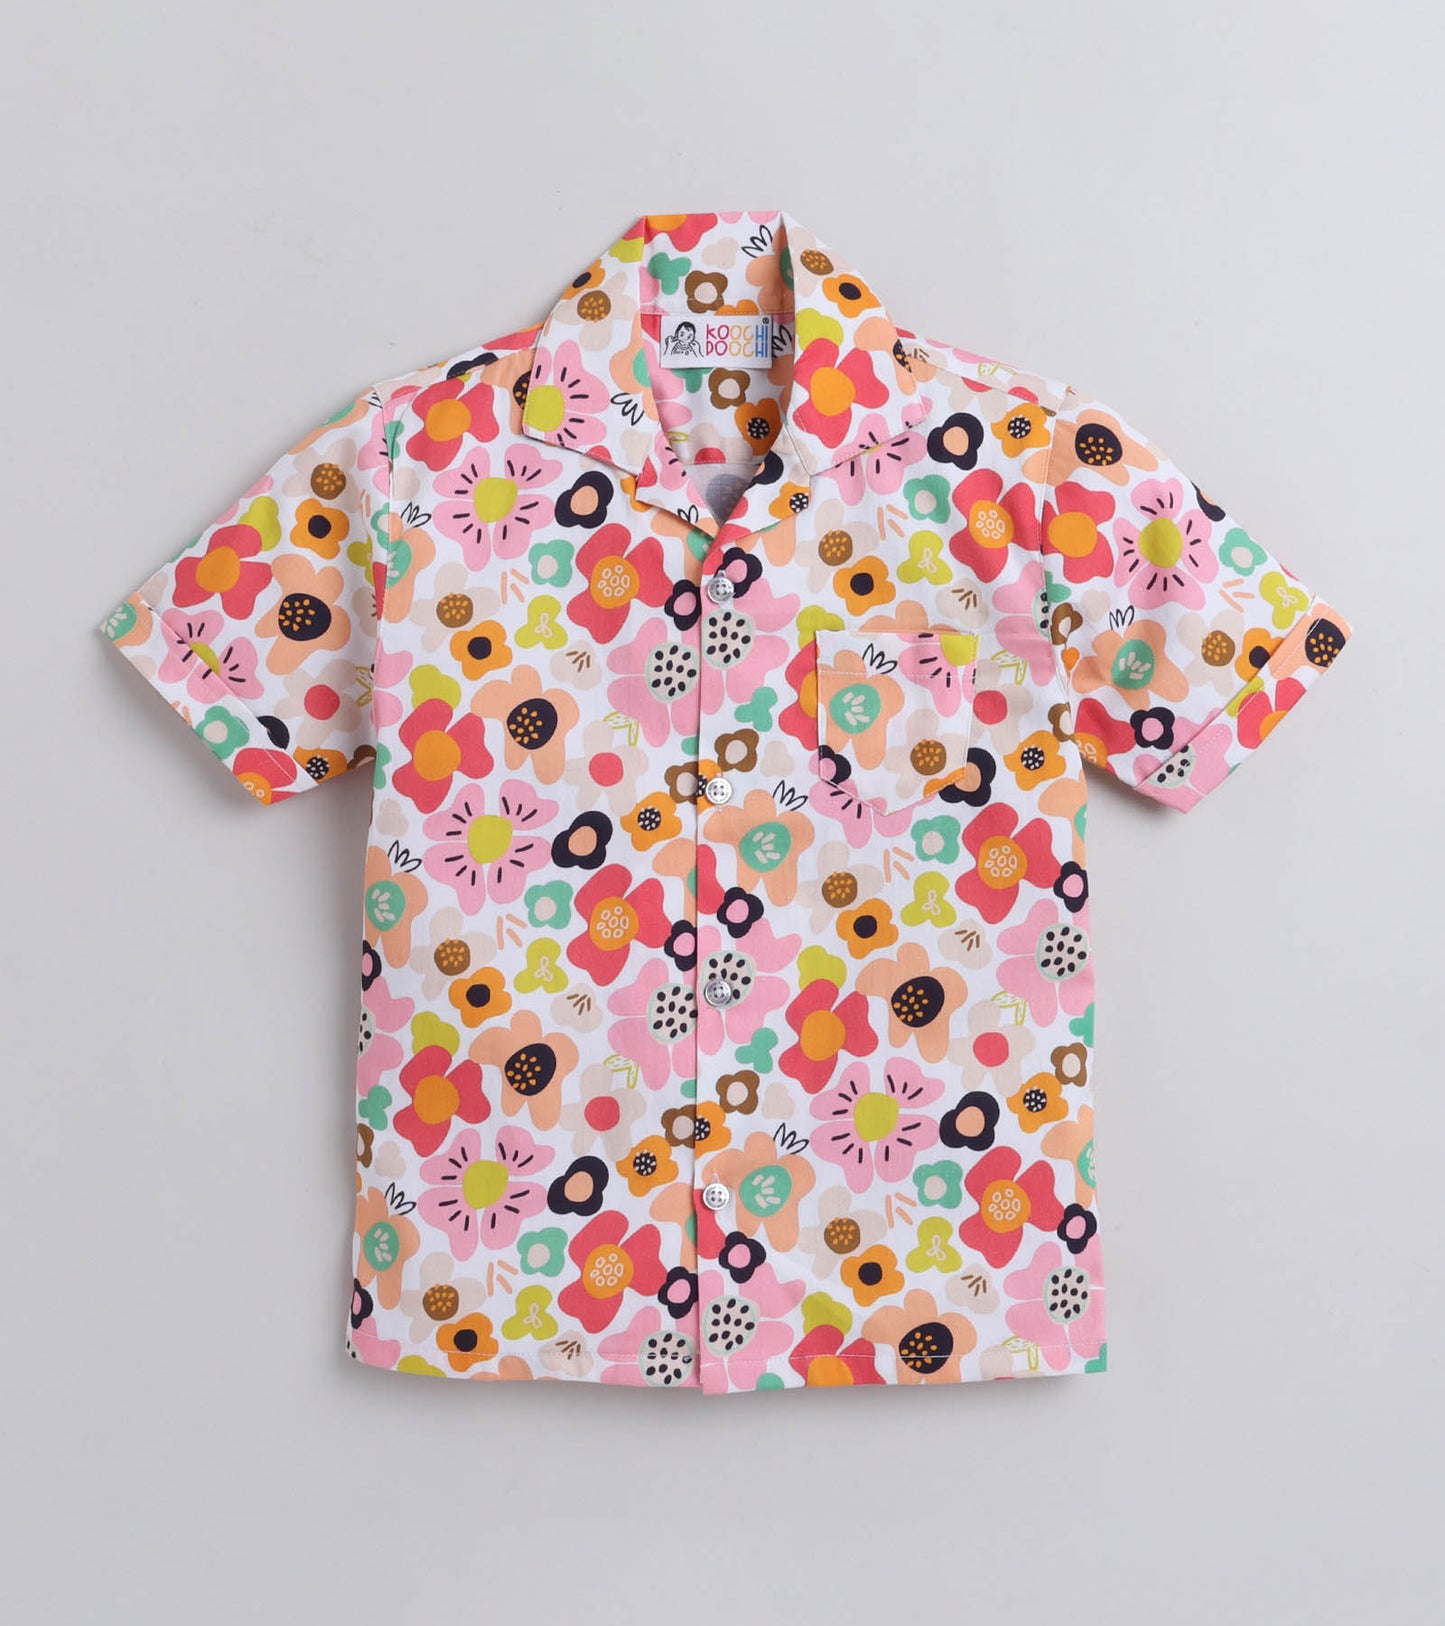 Max Flower Digital printed Shirt with White solid Shorts